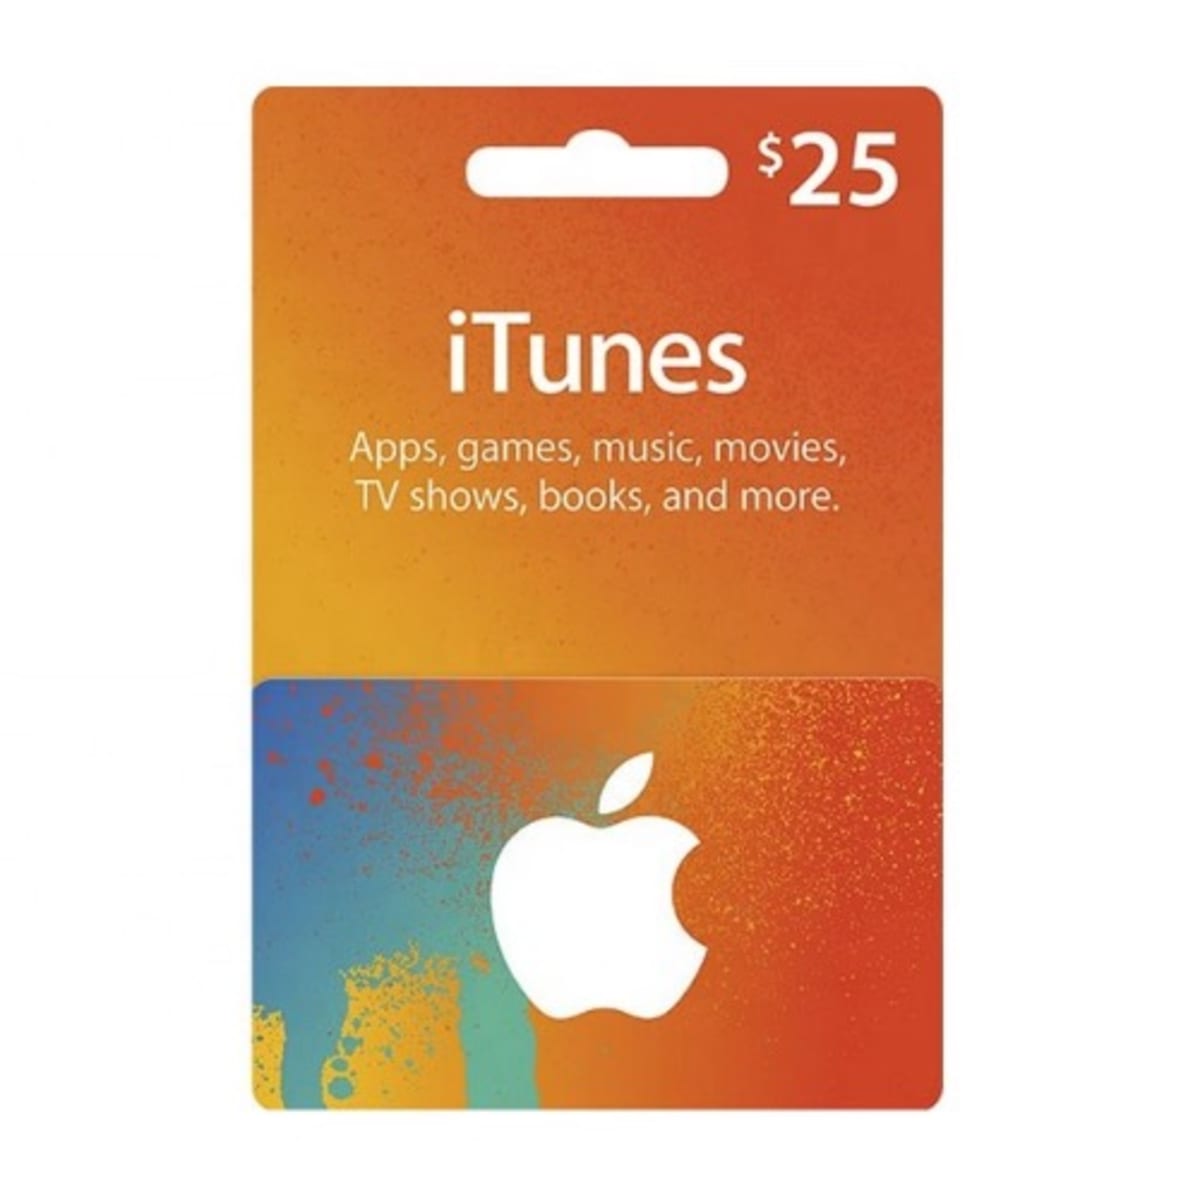 Cheapest iTunes Gift Card 50 USD USA